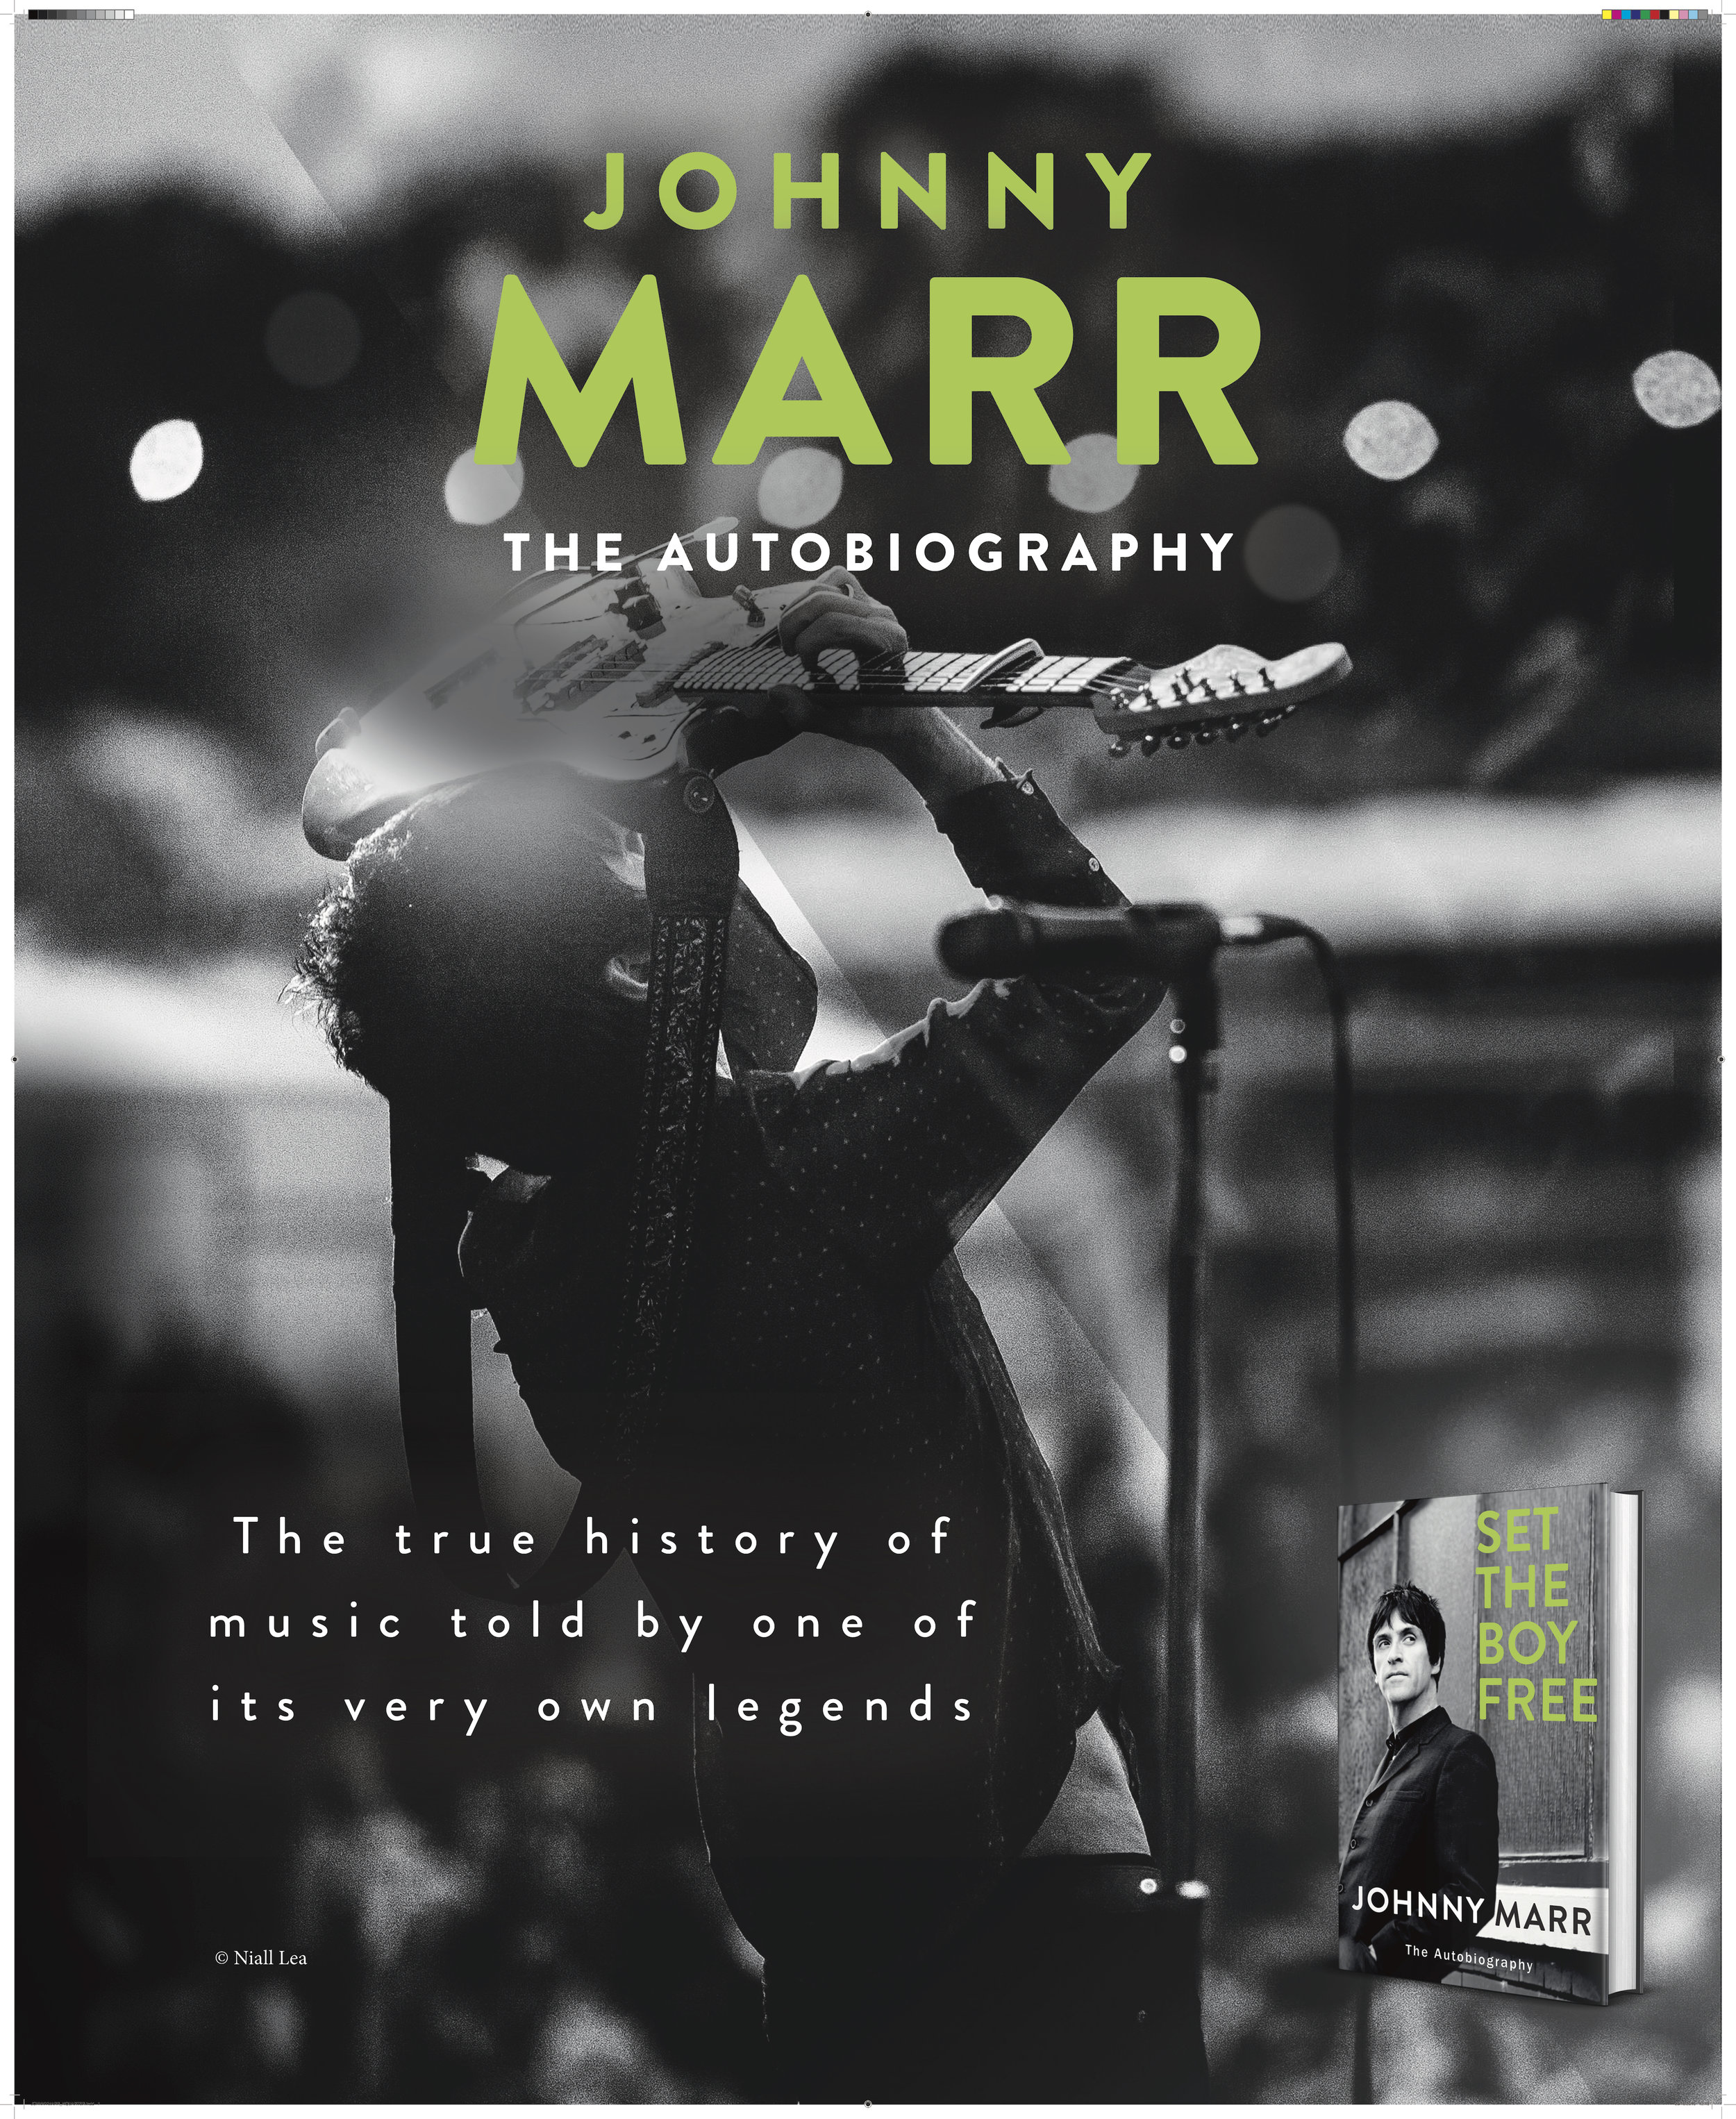 Johnny Marr Autobiography Poster.jpg